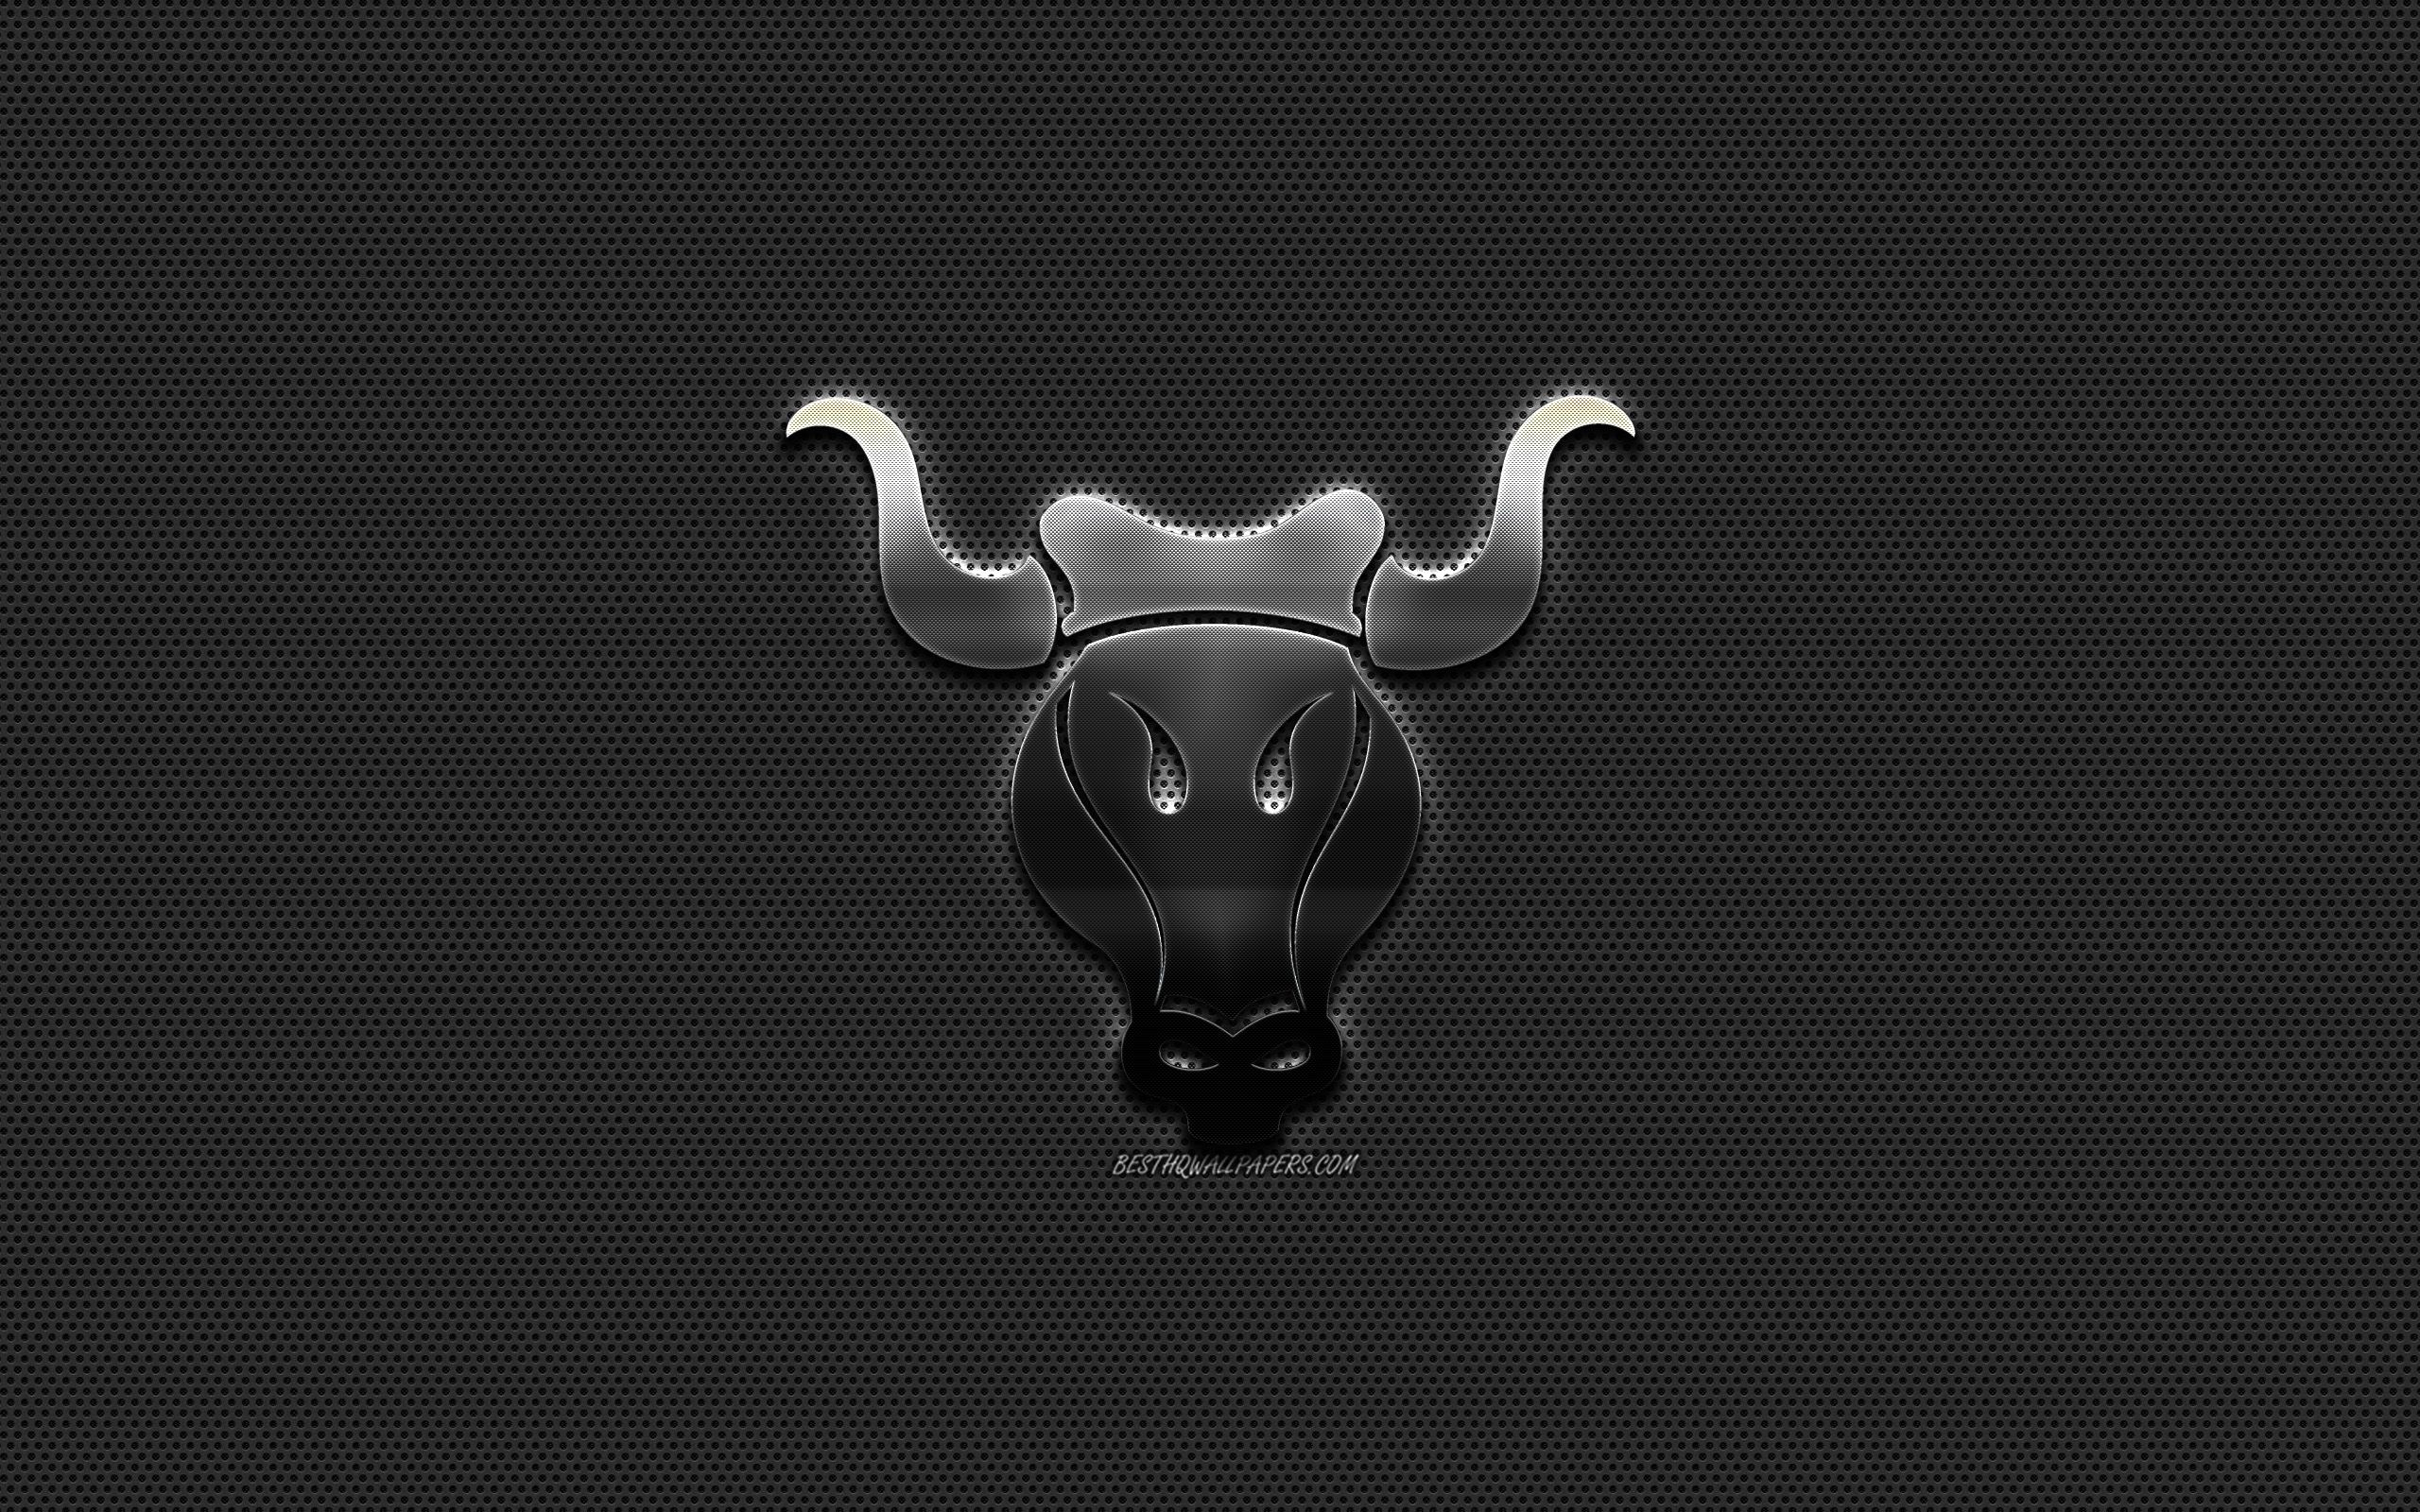 Download wallpaper Taurus zodiac sign, metal Taurus sign, Taurus Horoscope sign, metal style, metal mesh background, creative art, zodiac signs, Taurus for desktop with resolution 2560x1600. High Quality HD picture wallpaper